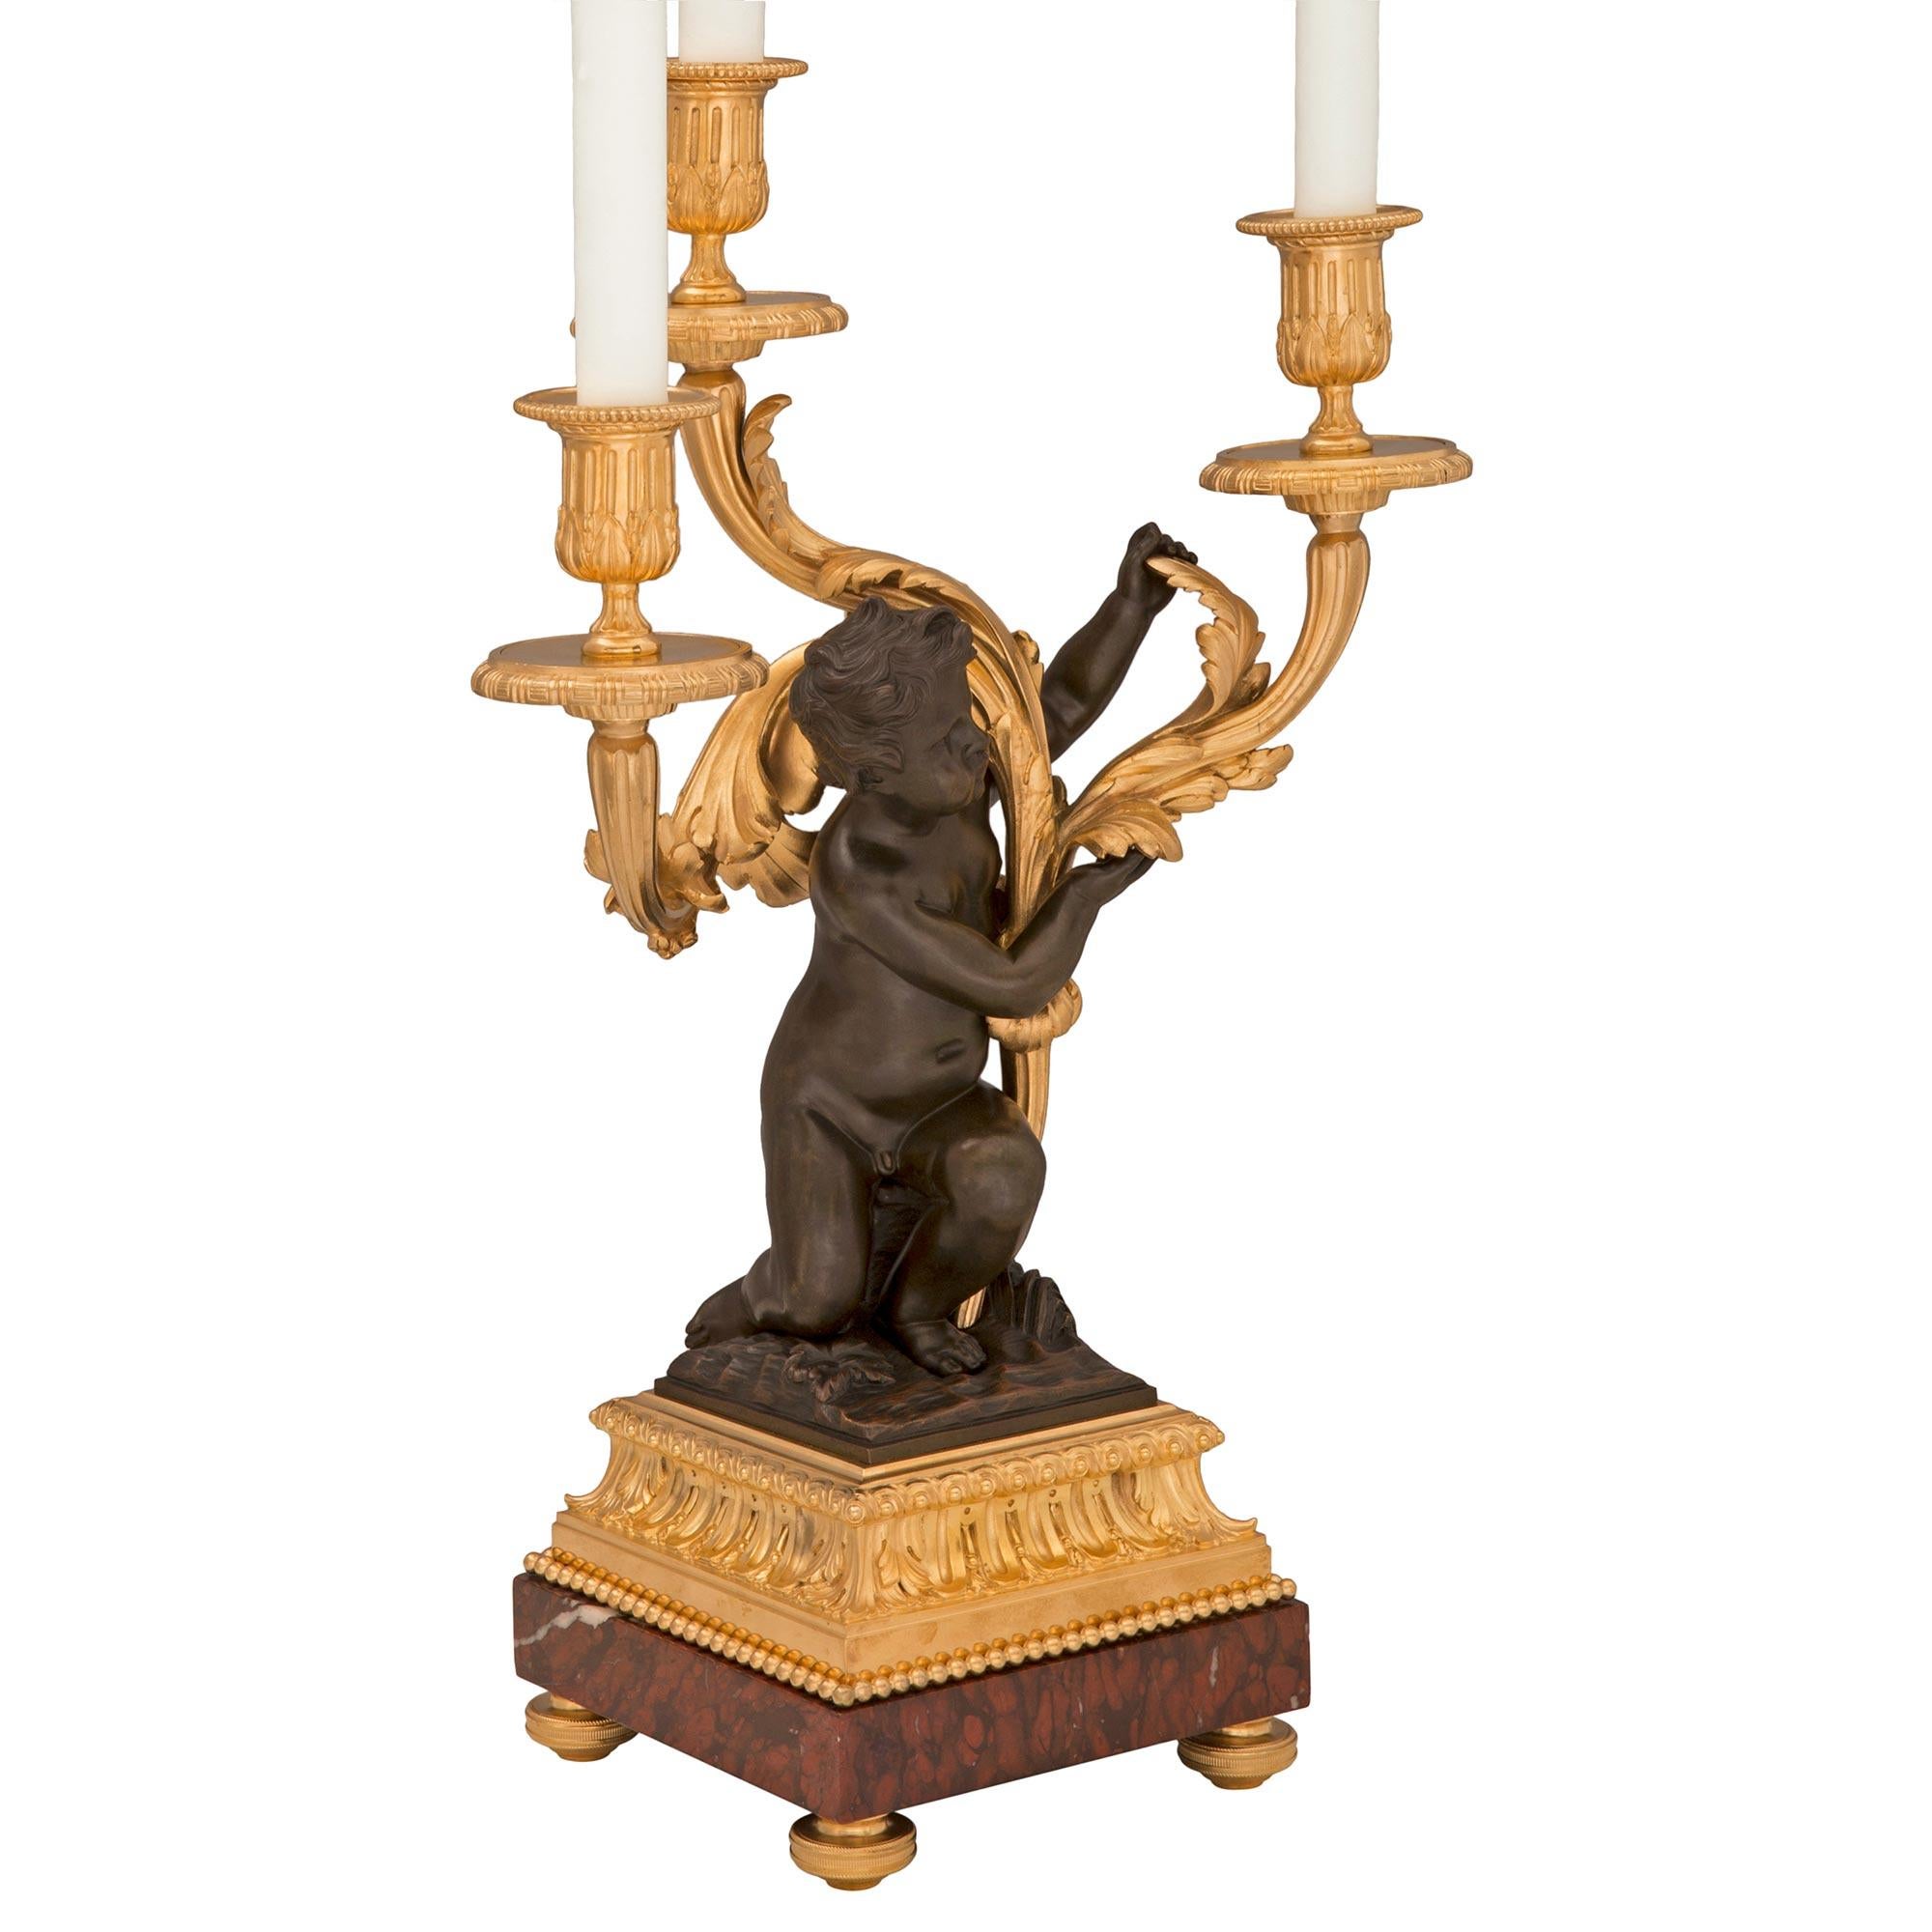 An exquisite true pair of French 19th century Louis XVI st. Belle Époque period patinated bronze, ormolu and Rouge Griotte marble candelabra lamps. Each three arm lamp is raised by elegant topie shaped feet below the Rouge Griotte marble with a fine